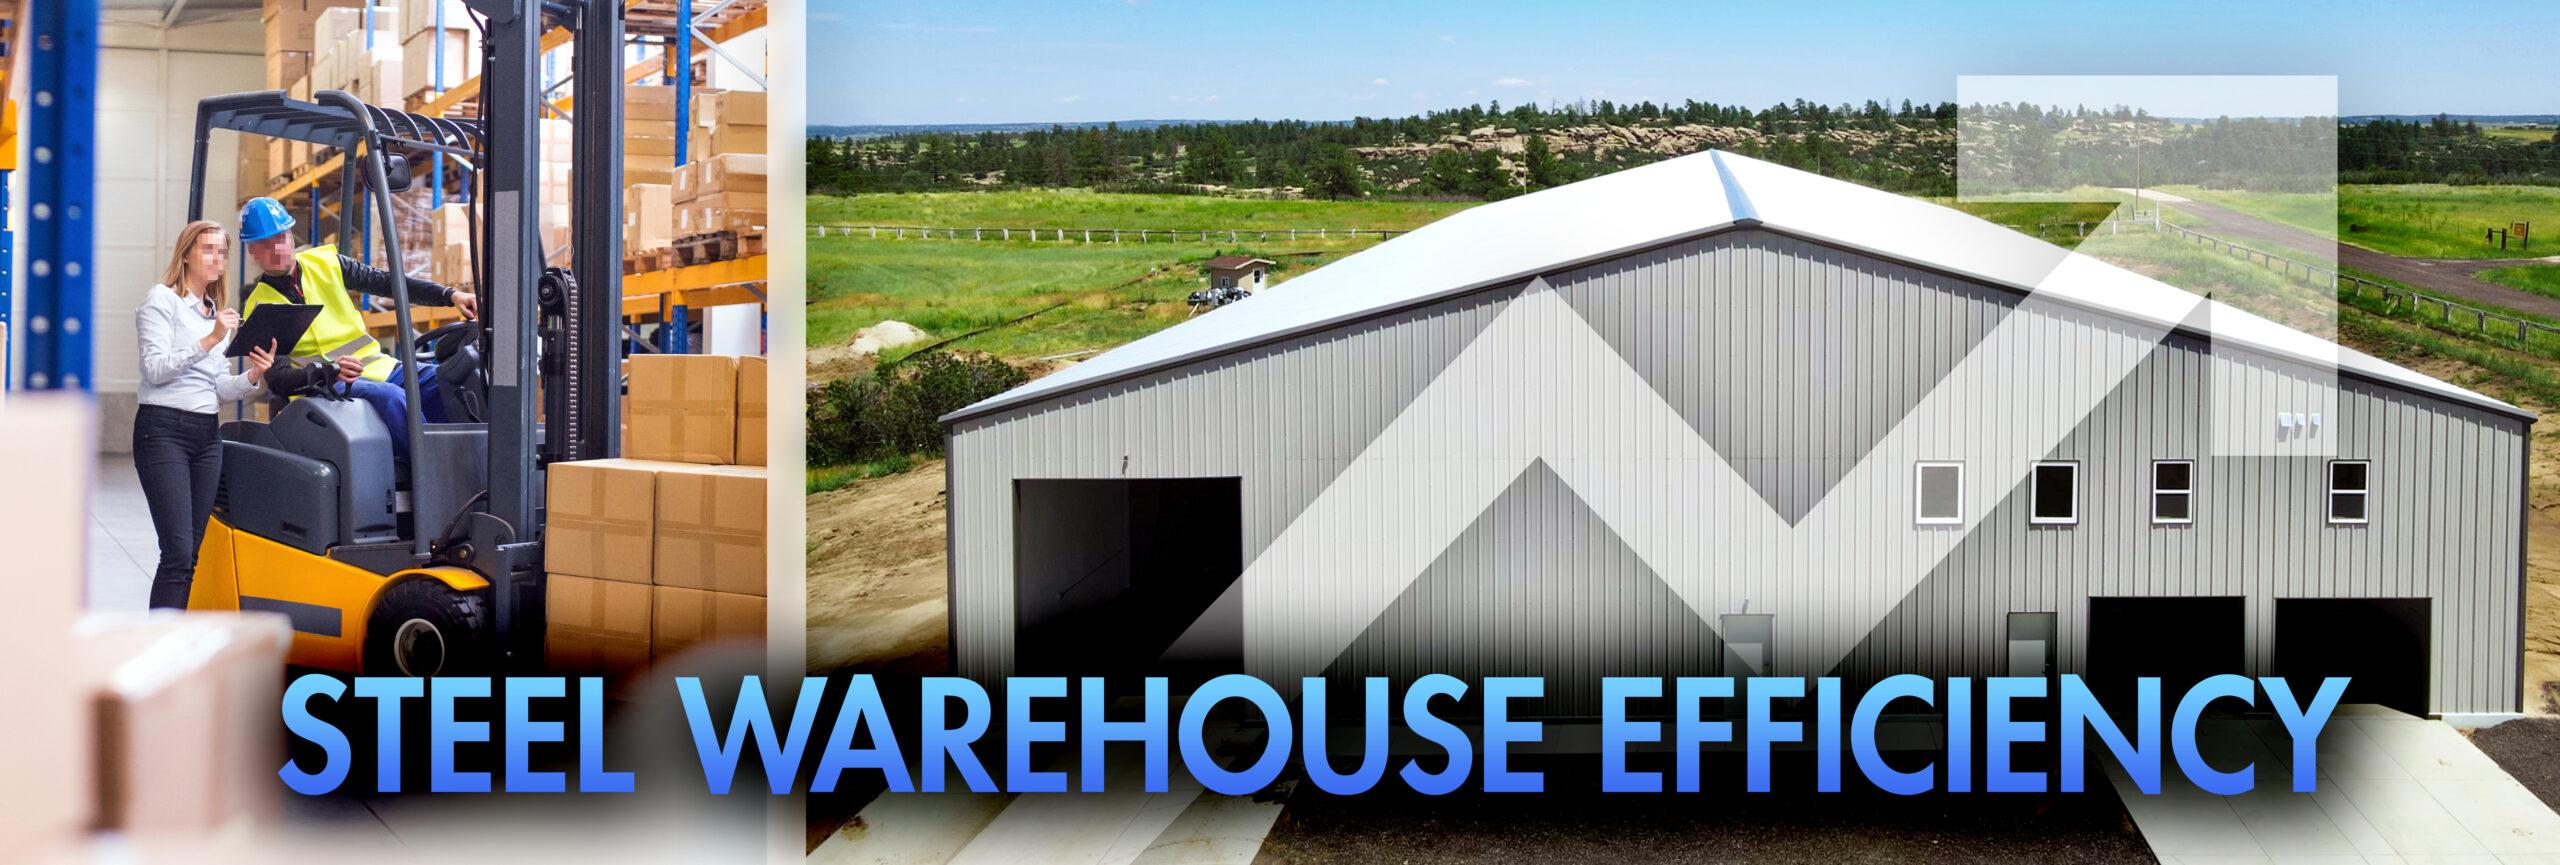 Customizing for Efficiency: Designing a Prefabricated Warehouse for Your Needs